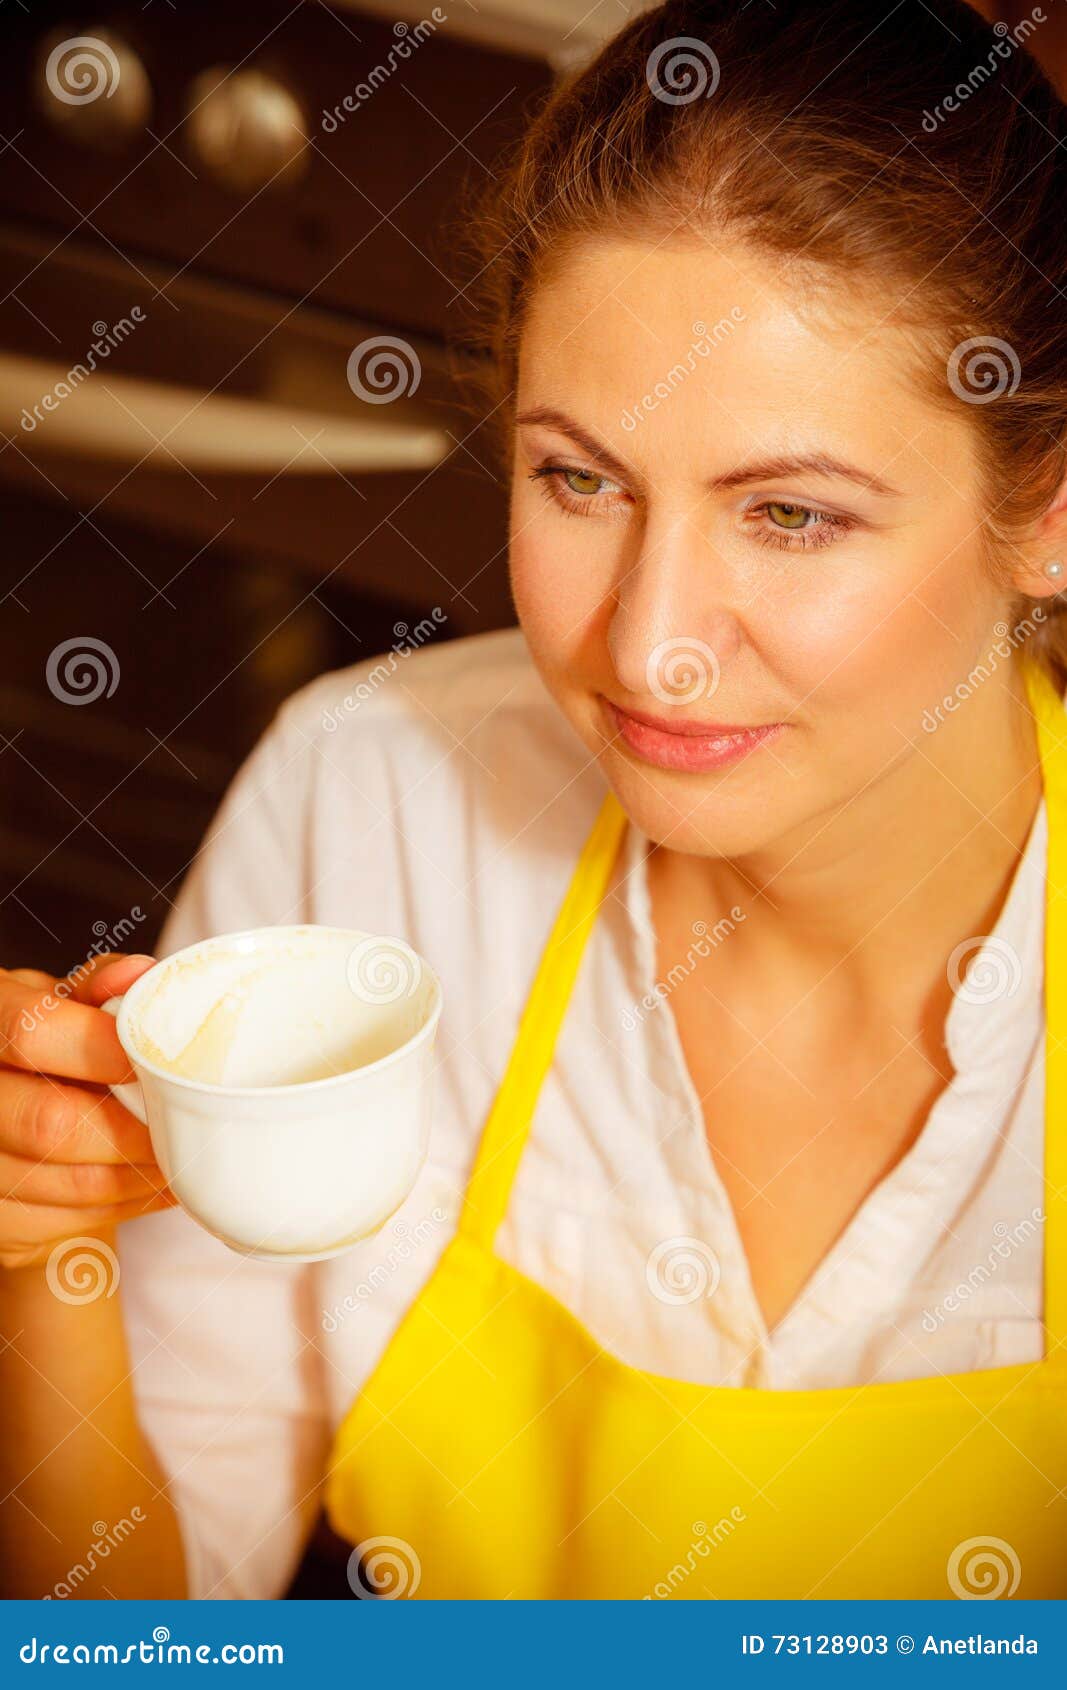 Mature Woman Holding Cup Of Coffee In Kitch